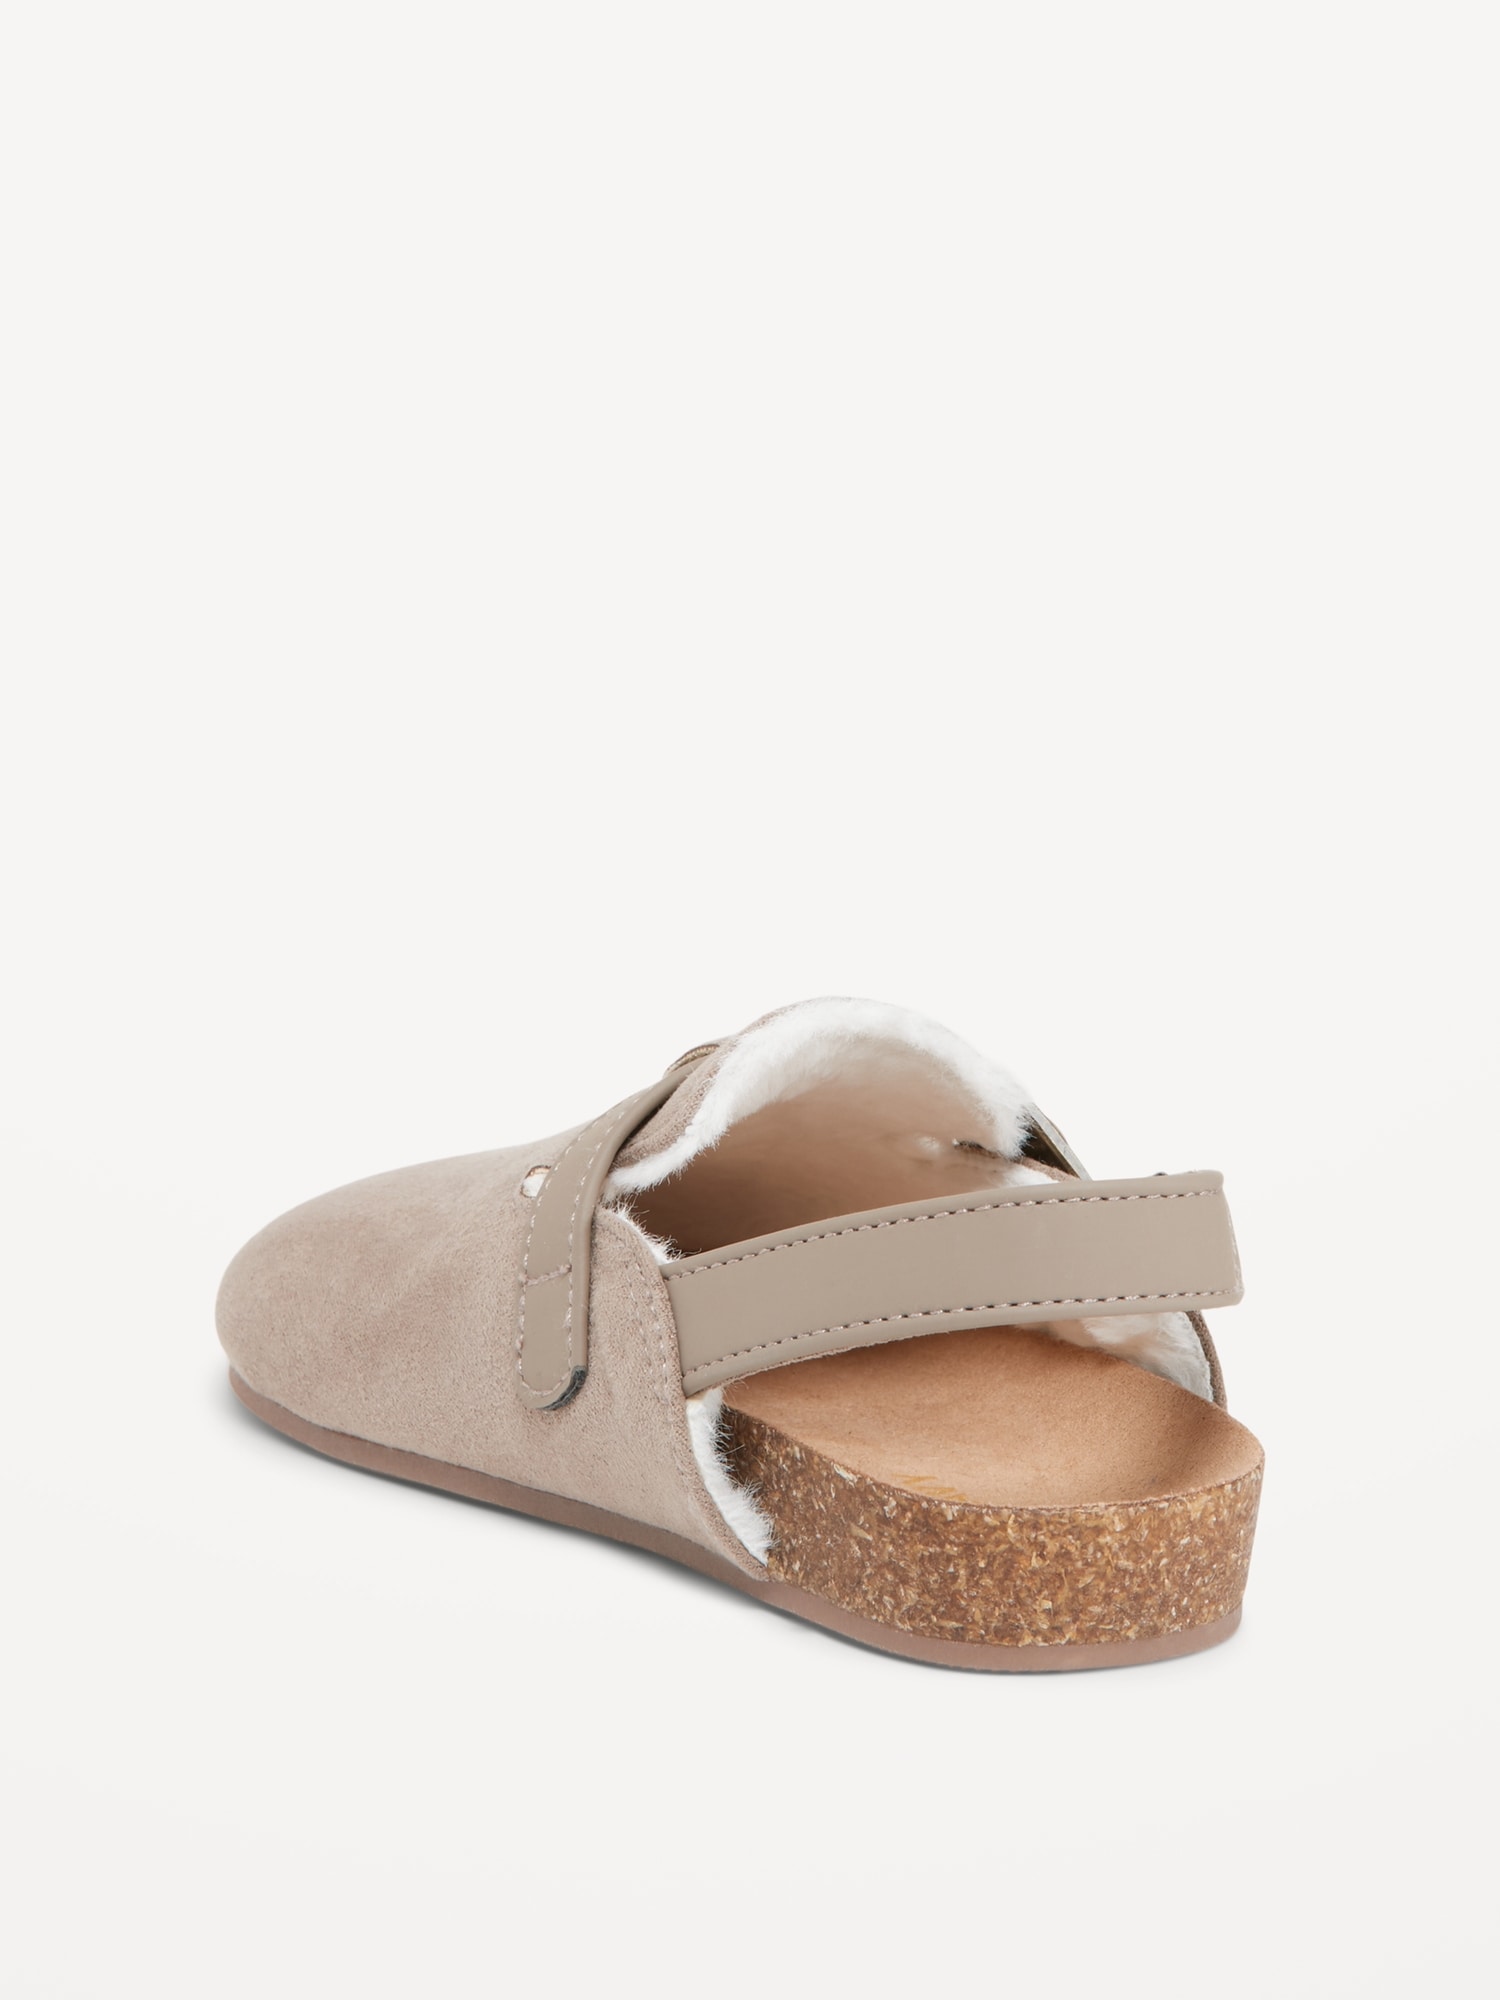 Faux-Suede Faux-Fur-Lined Clog Shoes for Toddler Girls | Old Navy